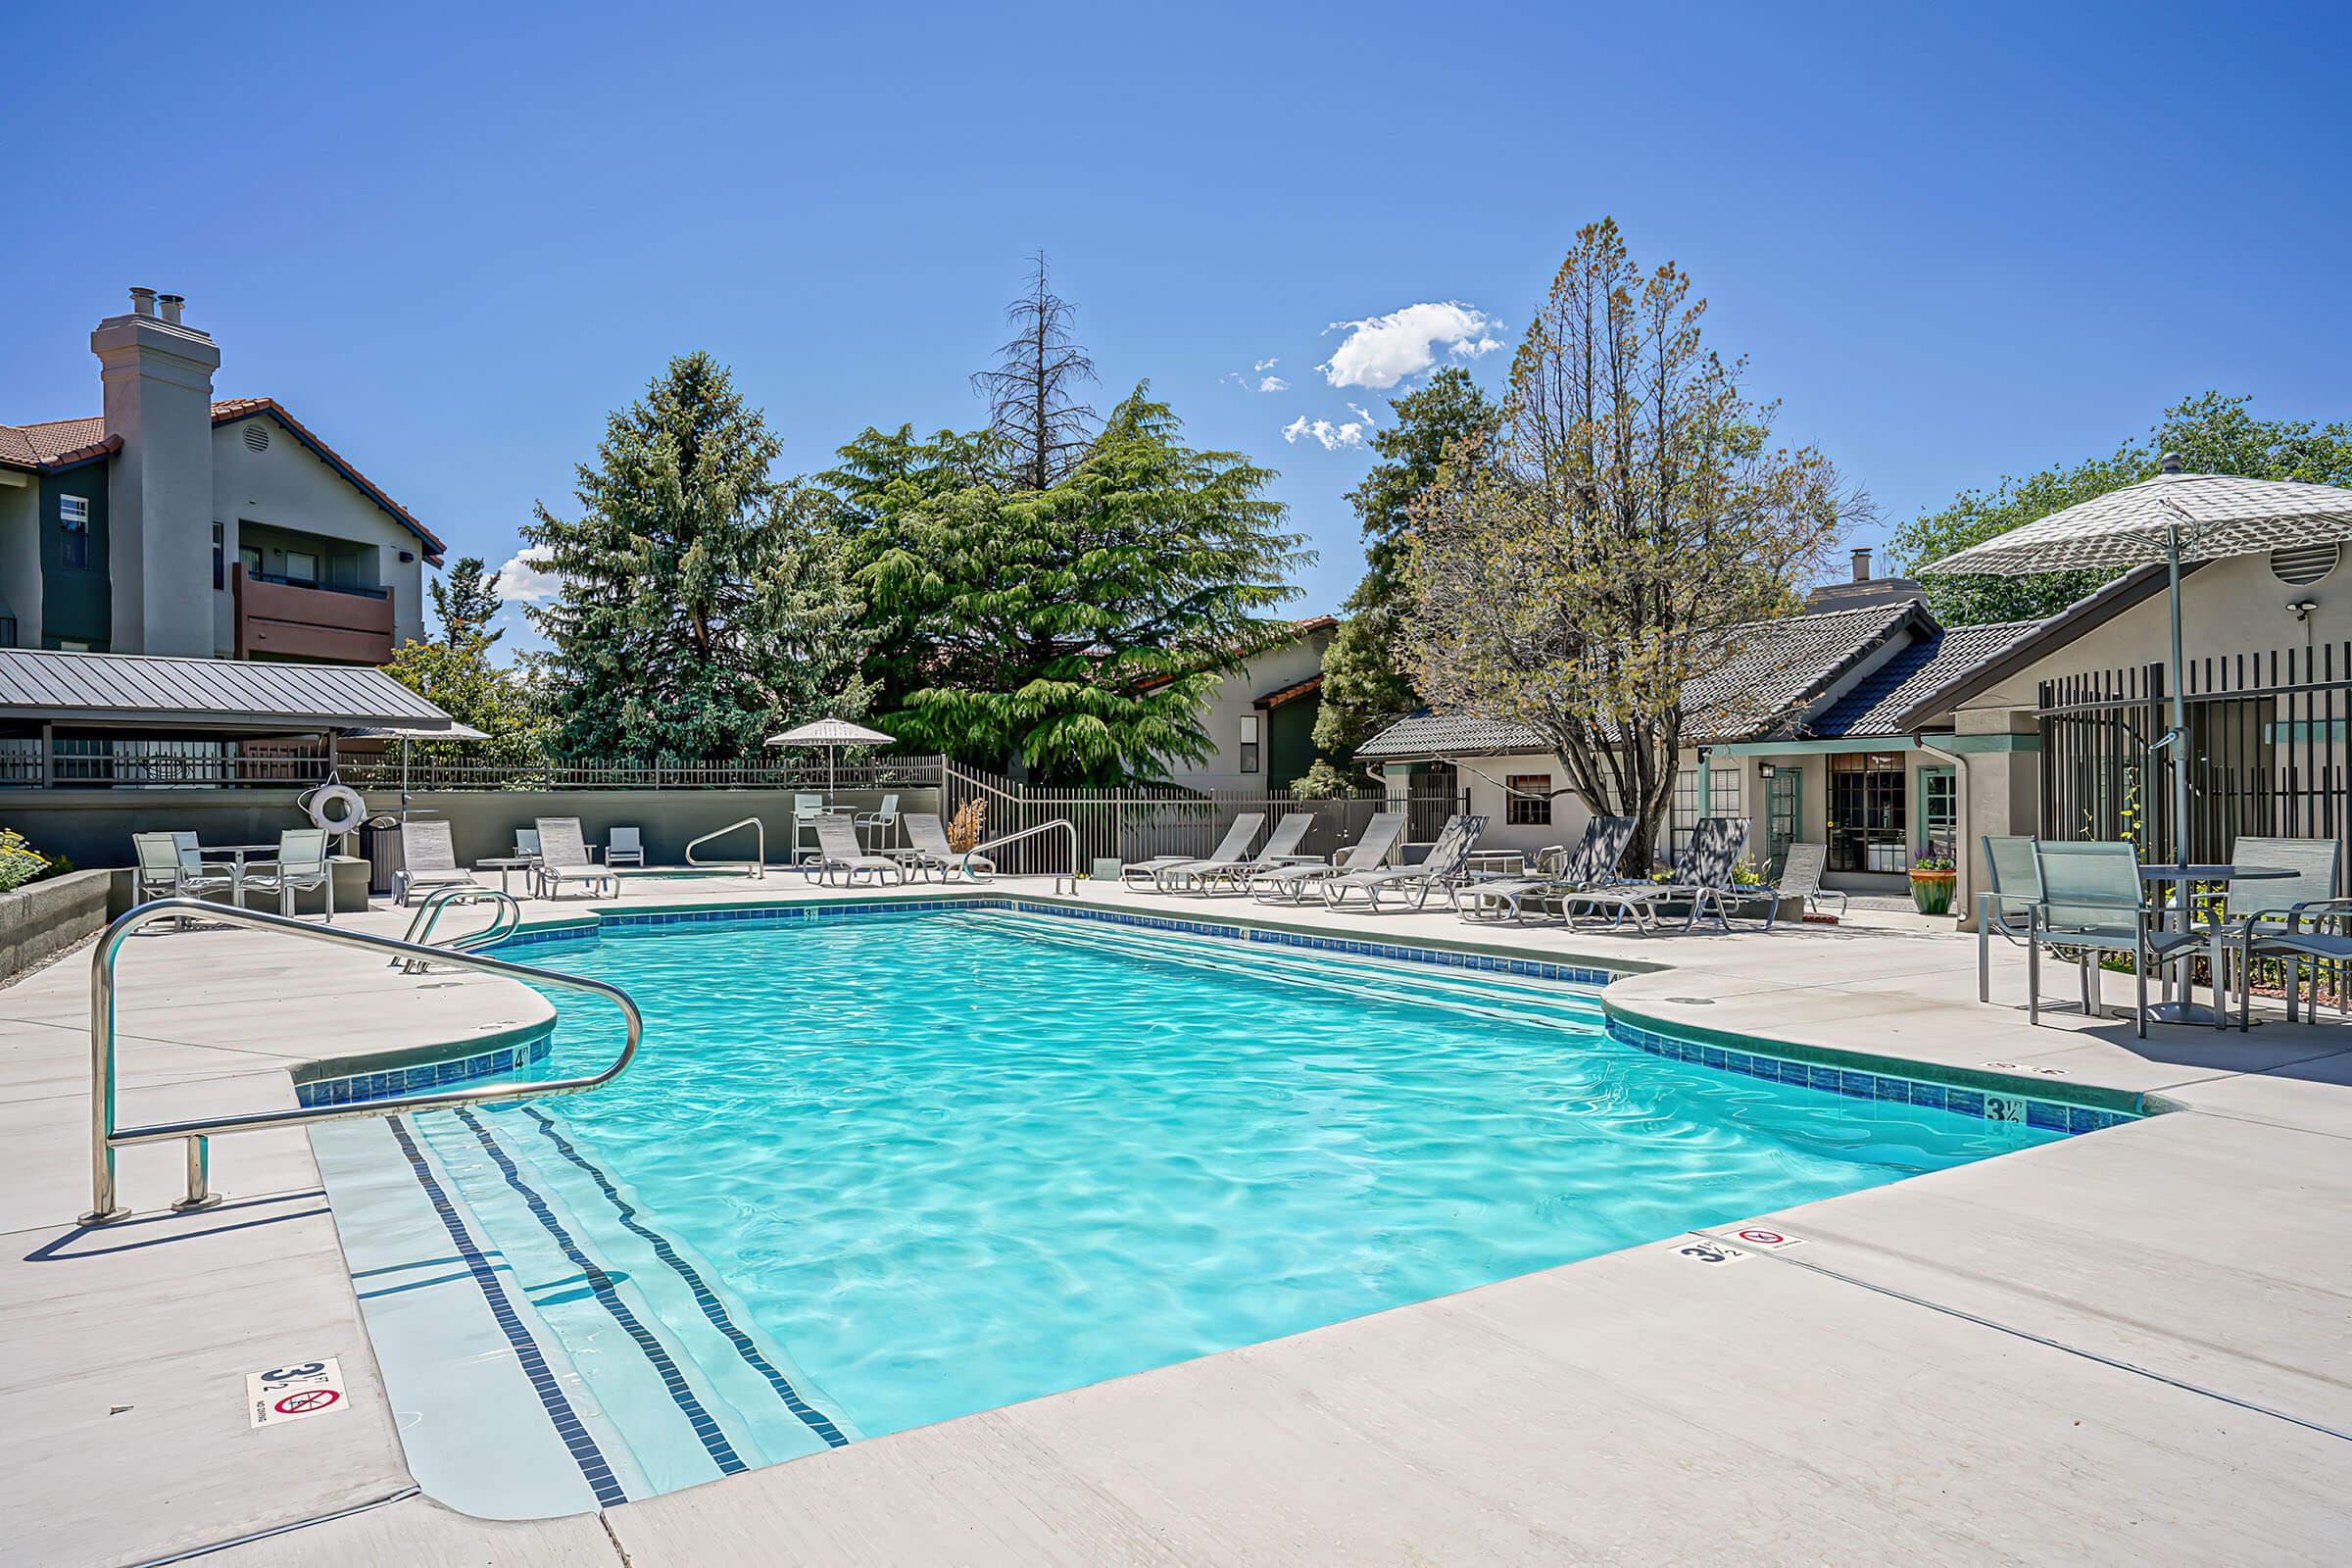 Sparkling Pool and Lounge with Free Wifi - The Overlook Apartments - Albuquerque - New Mexico 